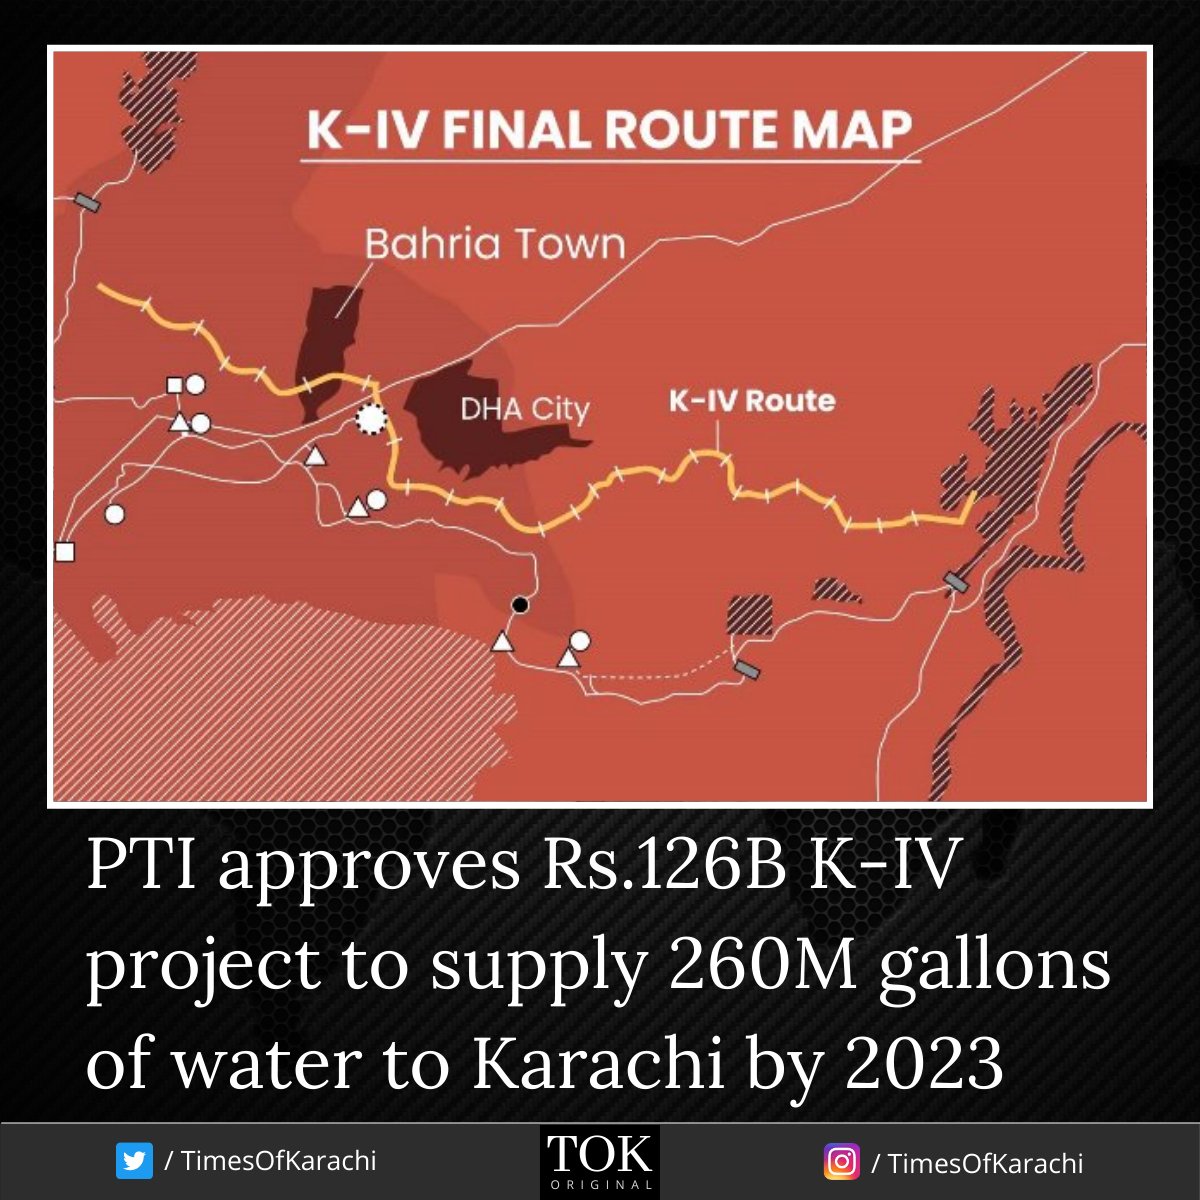 .@PTIofficial govt approved the long-stalled Rs126 billion K-IV water project to supply 260 million gallons of water to #Karachi by Oct 2023 to meet water needs. Federal Govt took over the water project from the #Sindh govt after it remained in limbo since 2011.